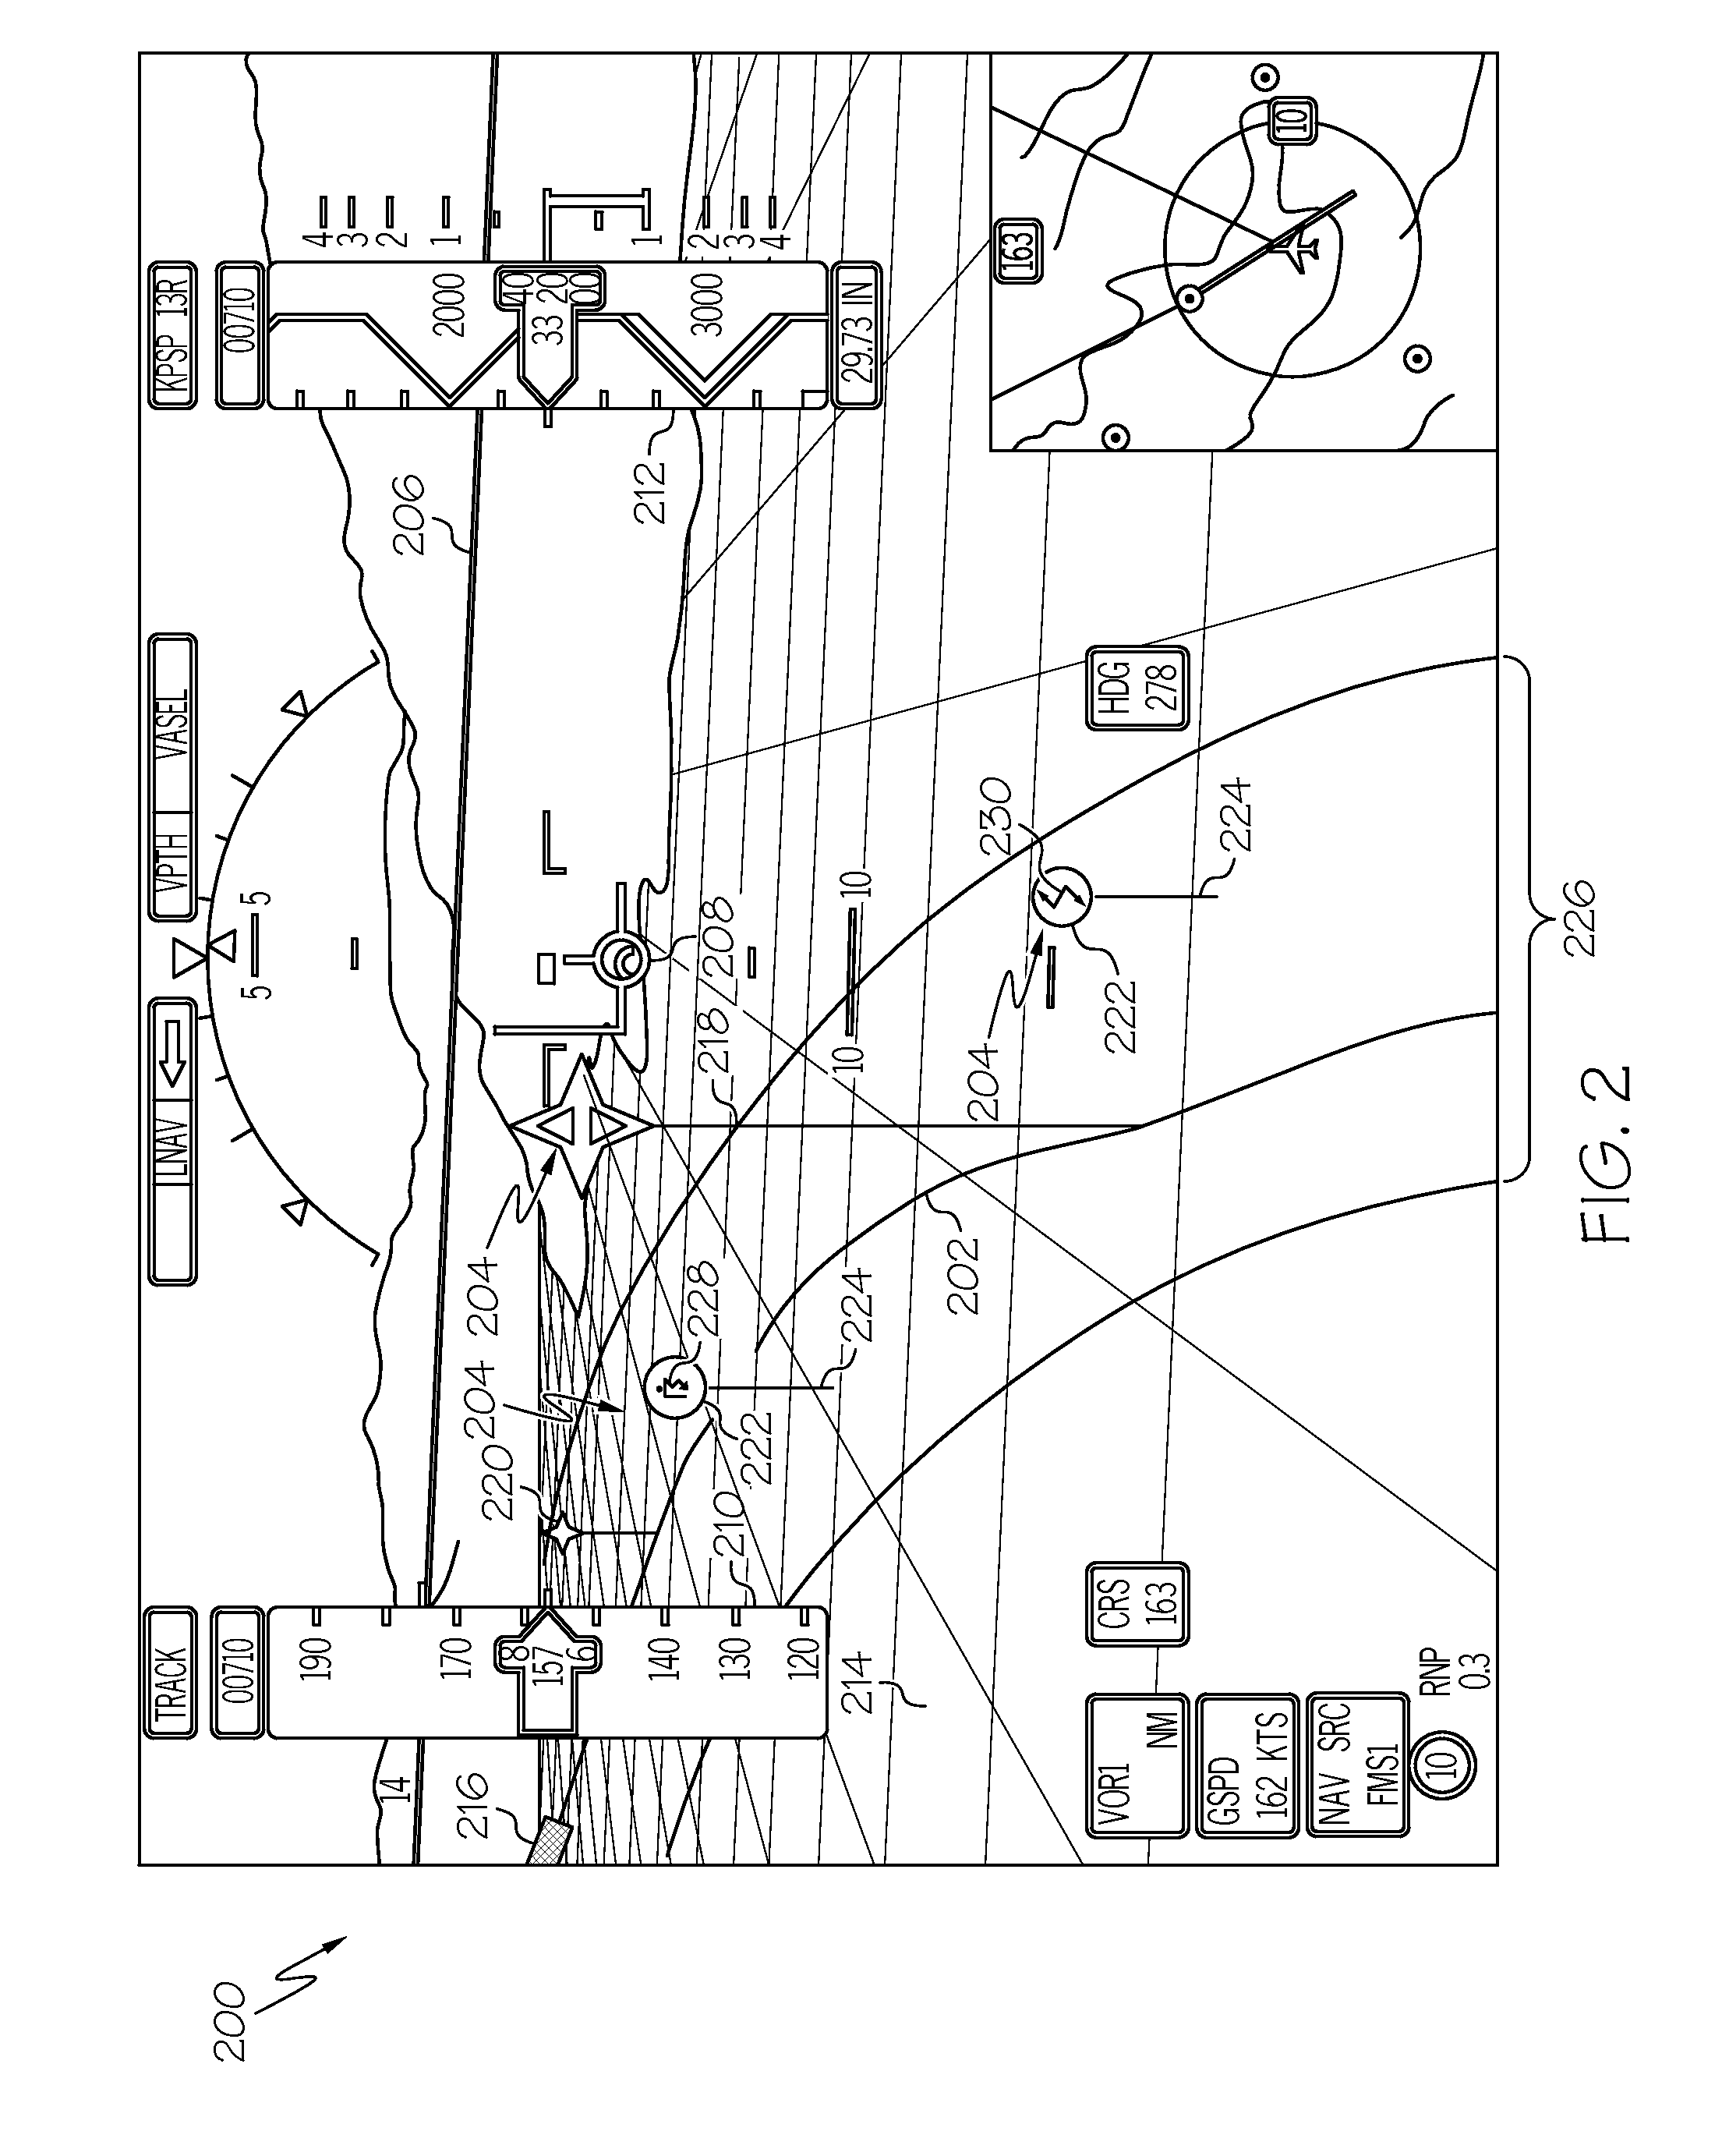 System and method for graphically displaying weather hazards in a perspective view